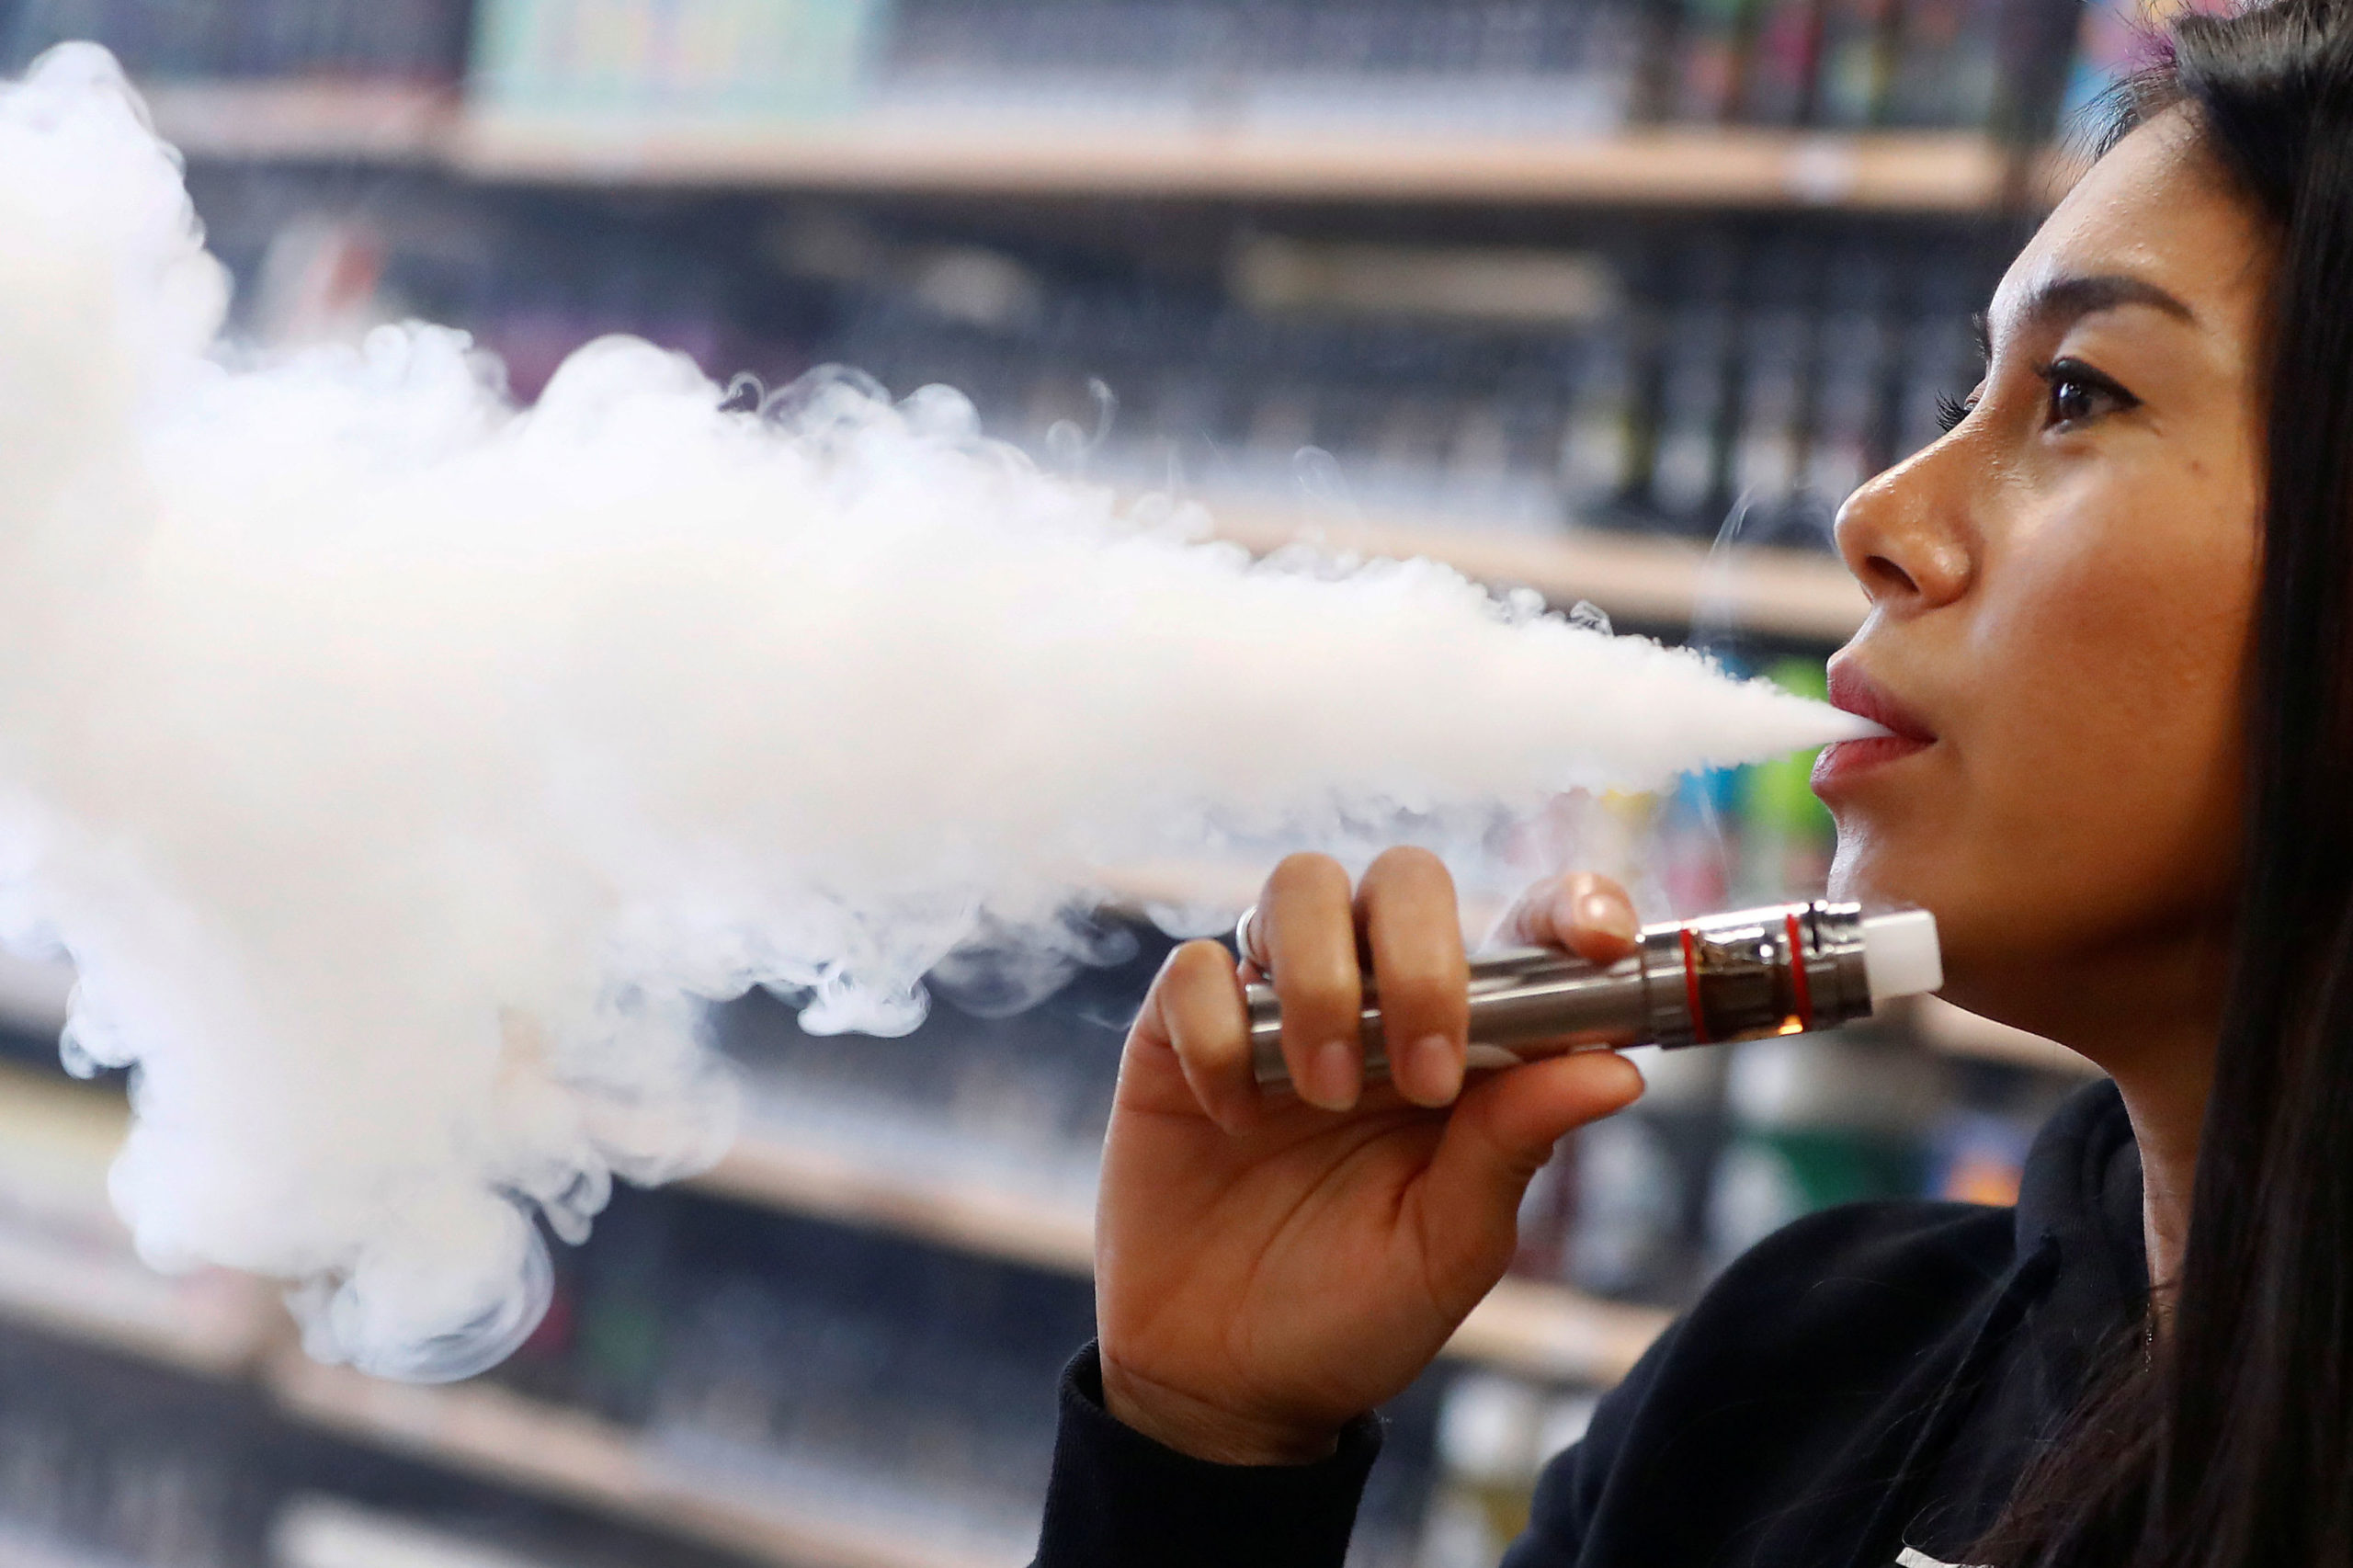 Teenagers have discovered a loophole within the e-cigarette taste ban, report says